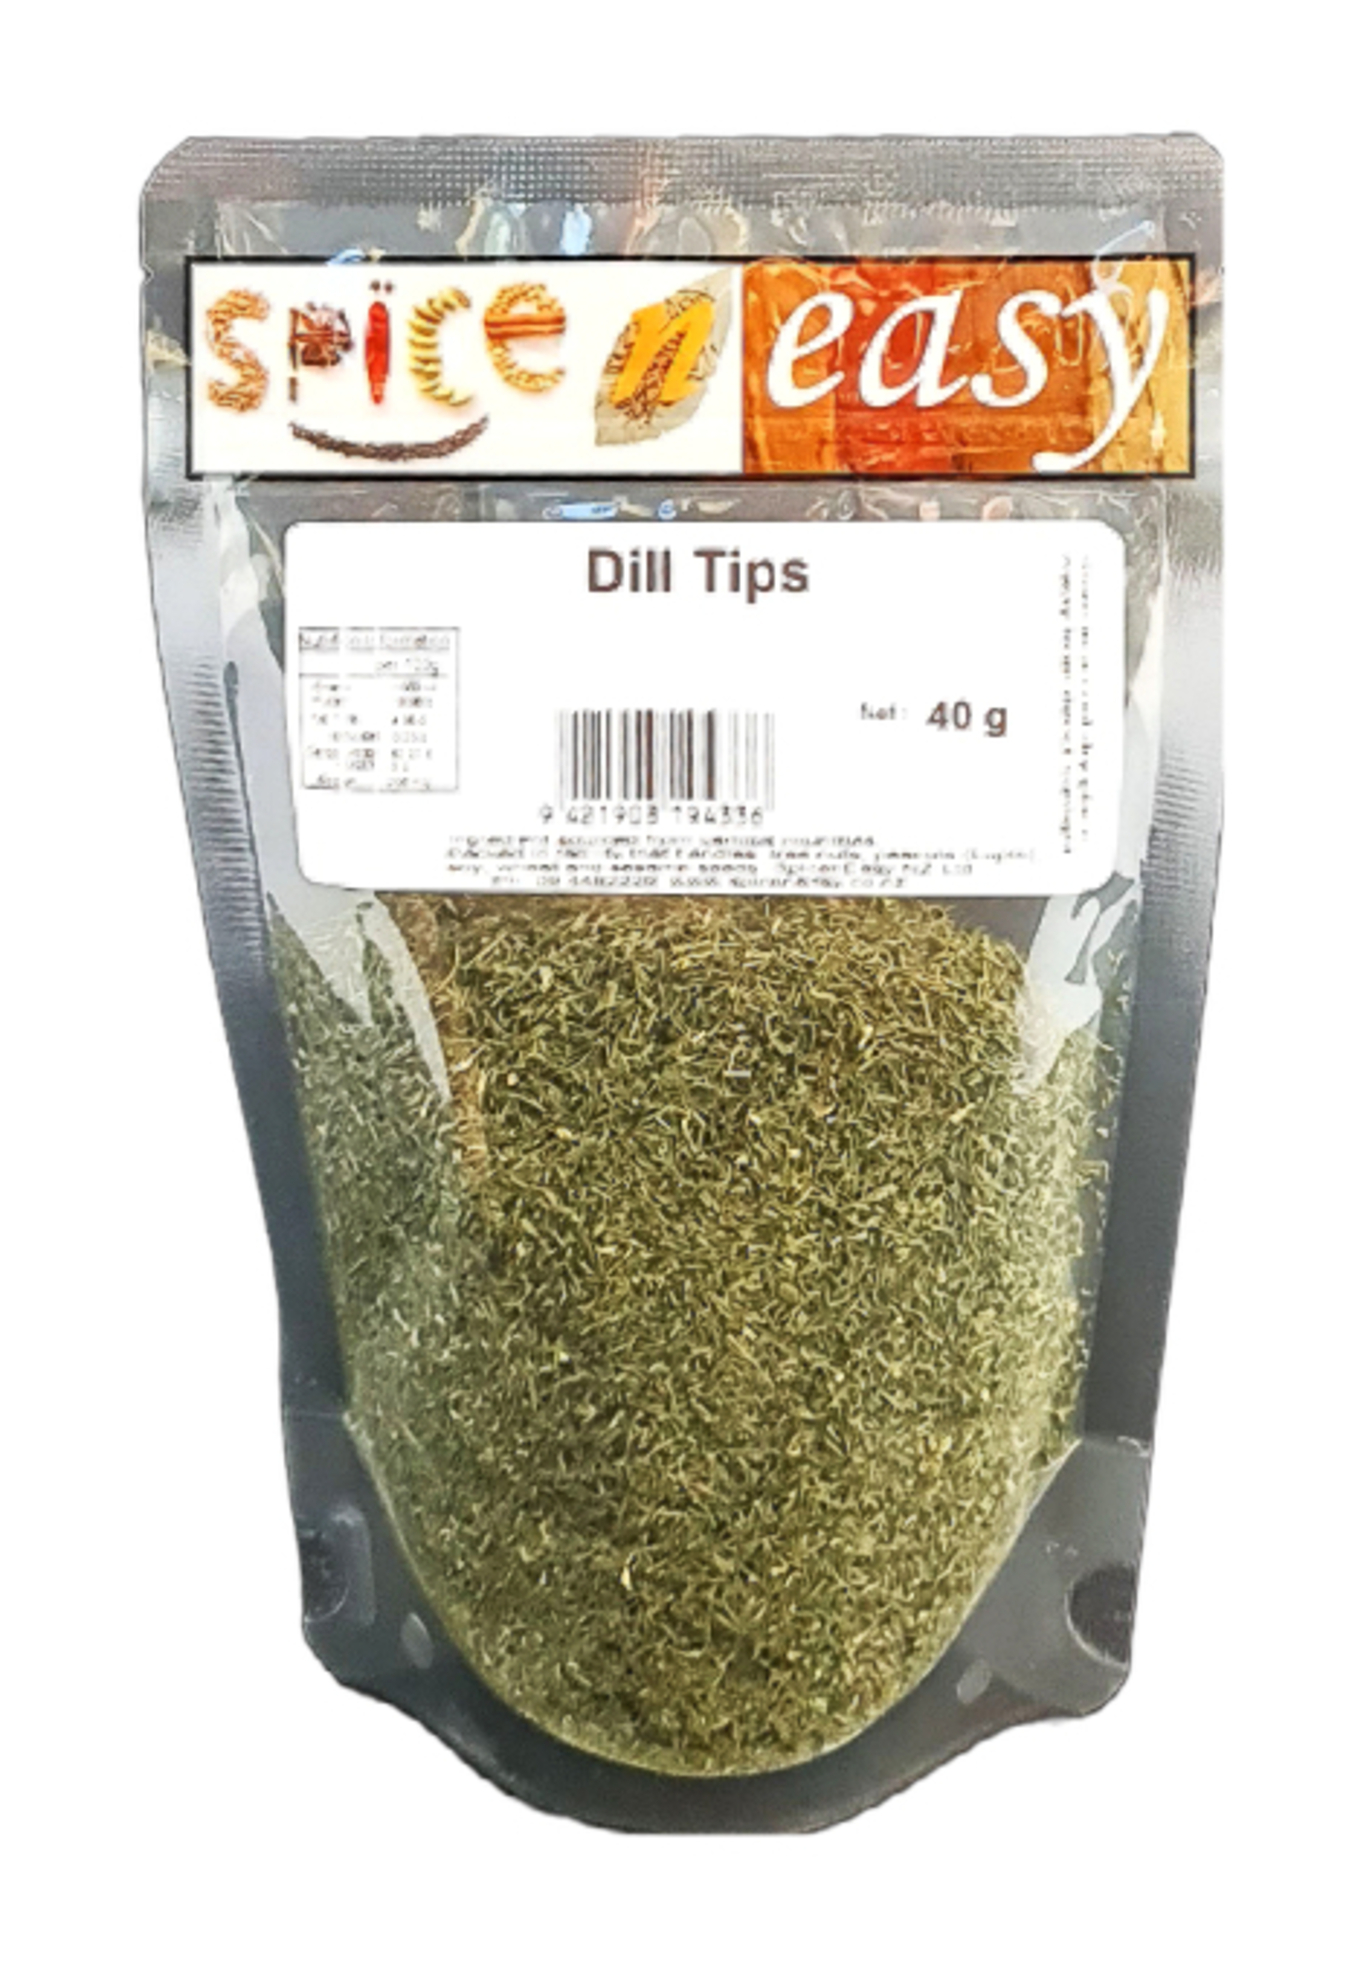 Dill Tips Rubbed 40g